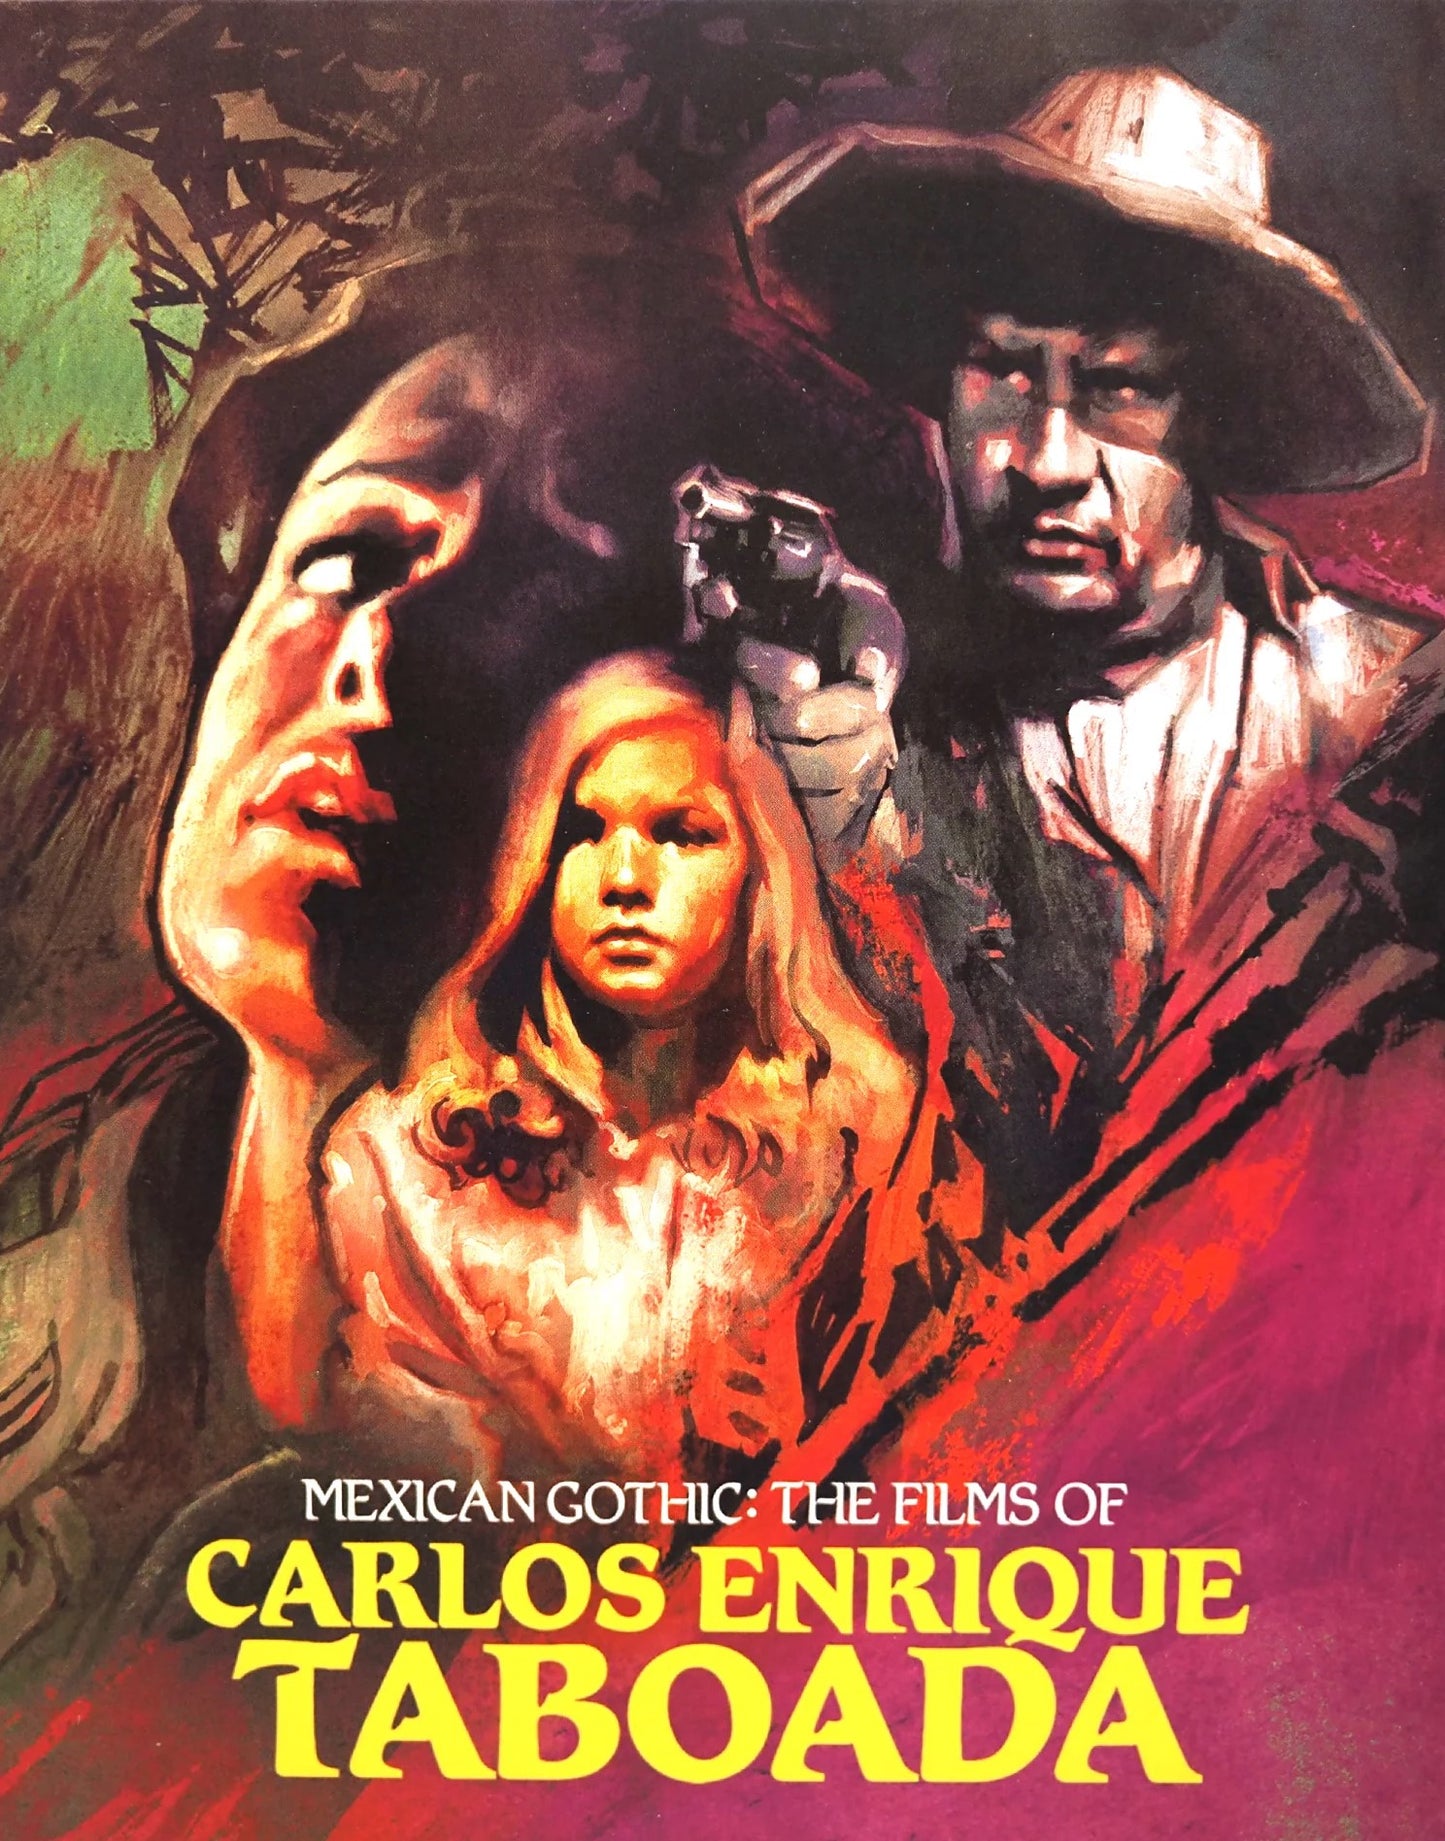 Mexican Gothic: The Films of Carlos Enrique Taboada Limited Edition Vinegar Syndrome Blu-Ray [NEW] [SLIPCOVER]